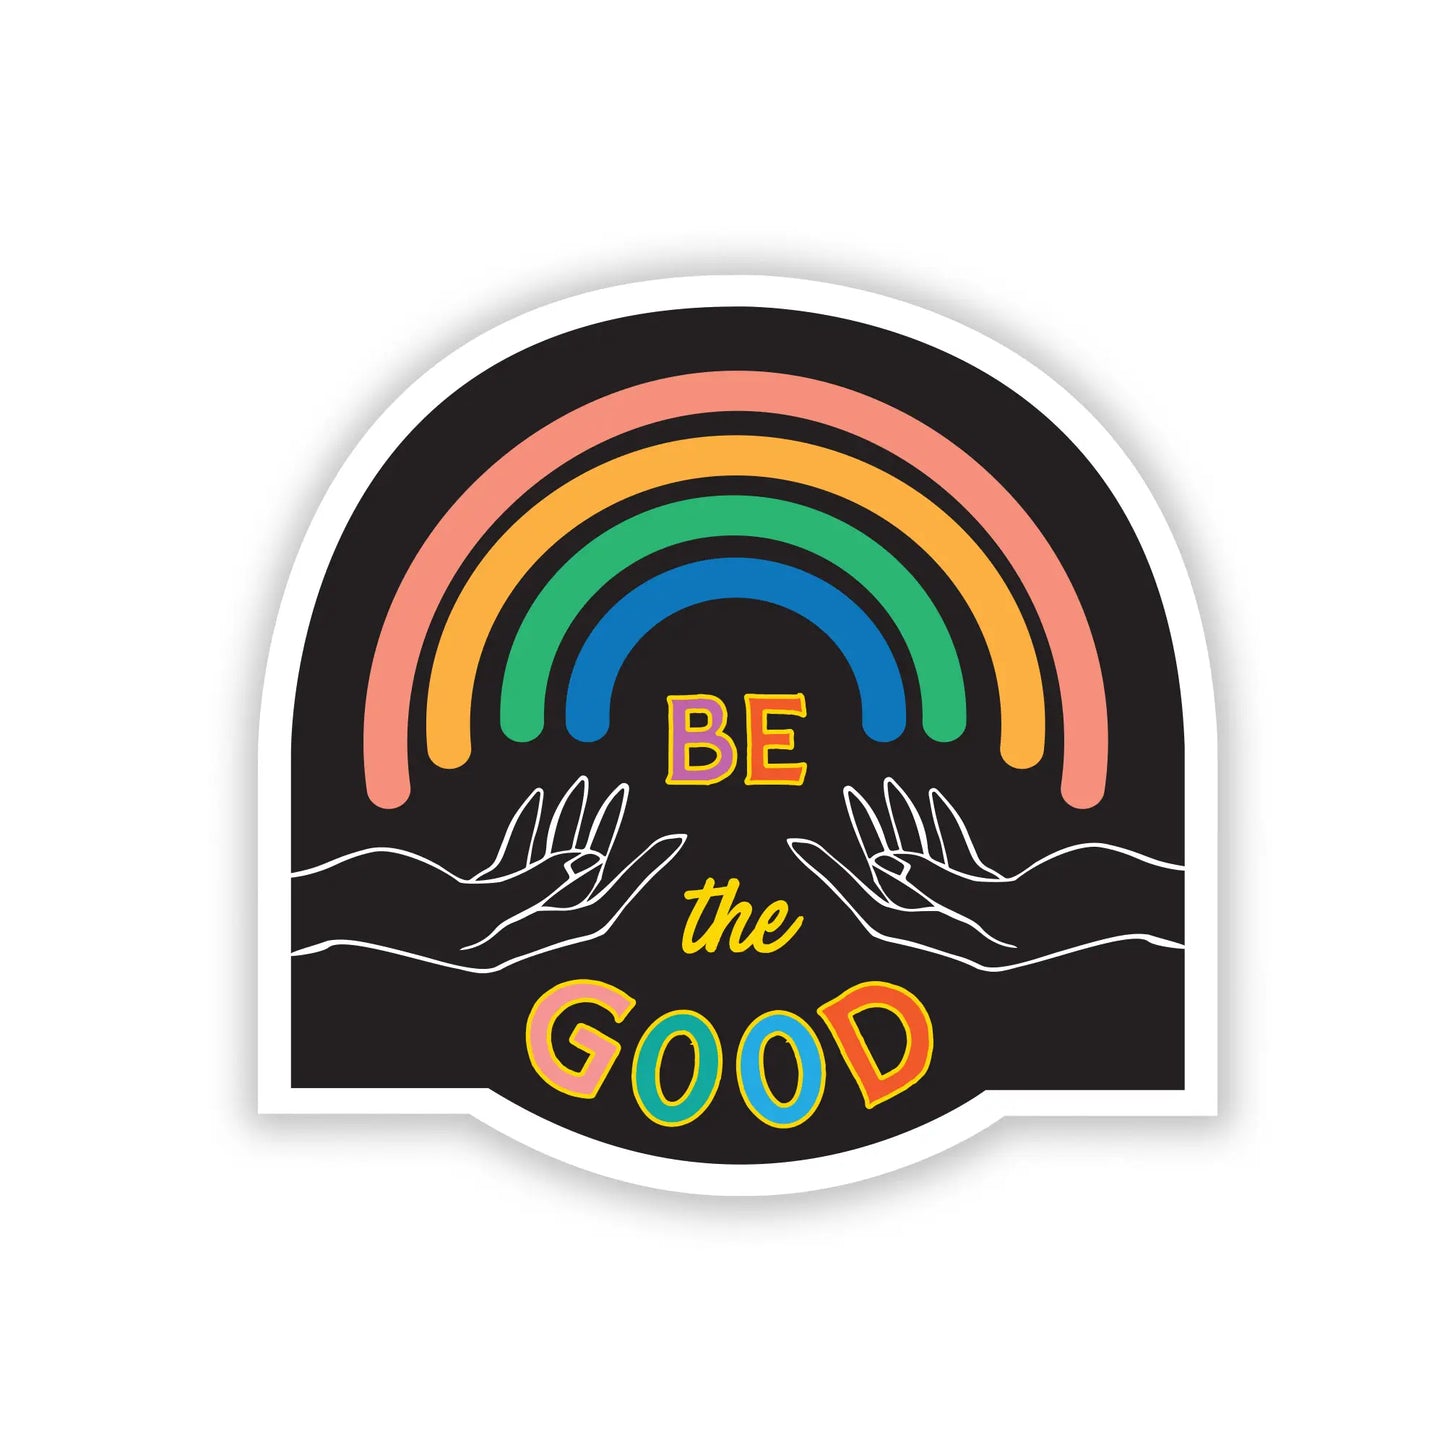 Antiquaria Sticker-Be the good - Moon Room Shop and Wellness